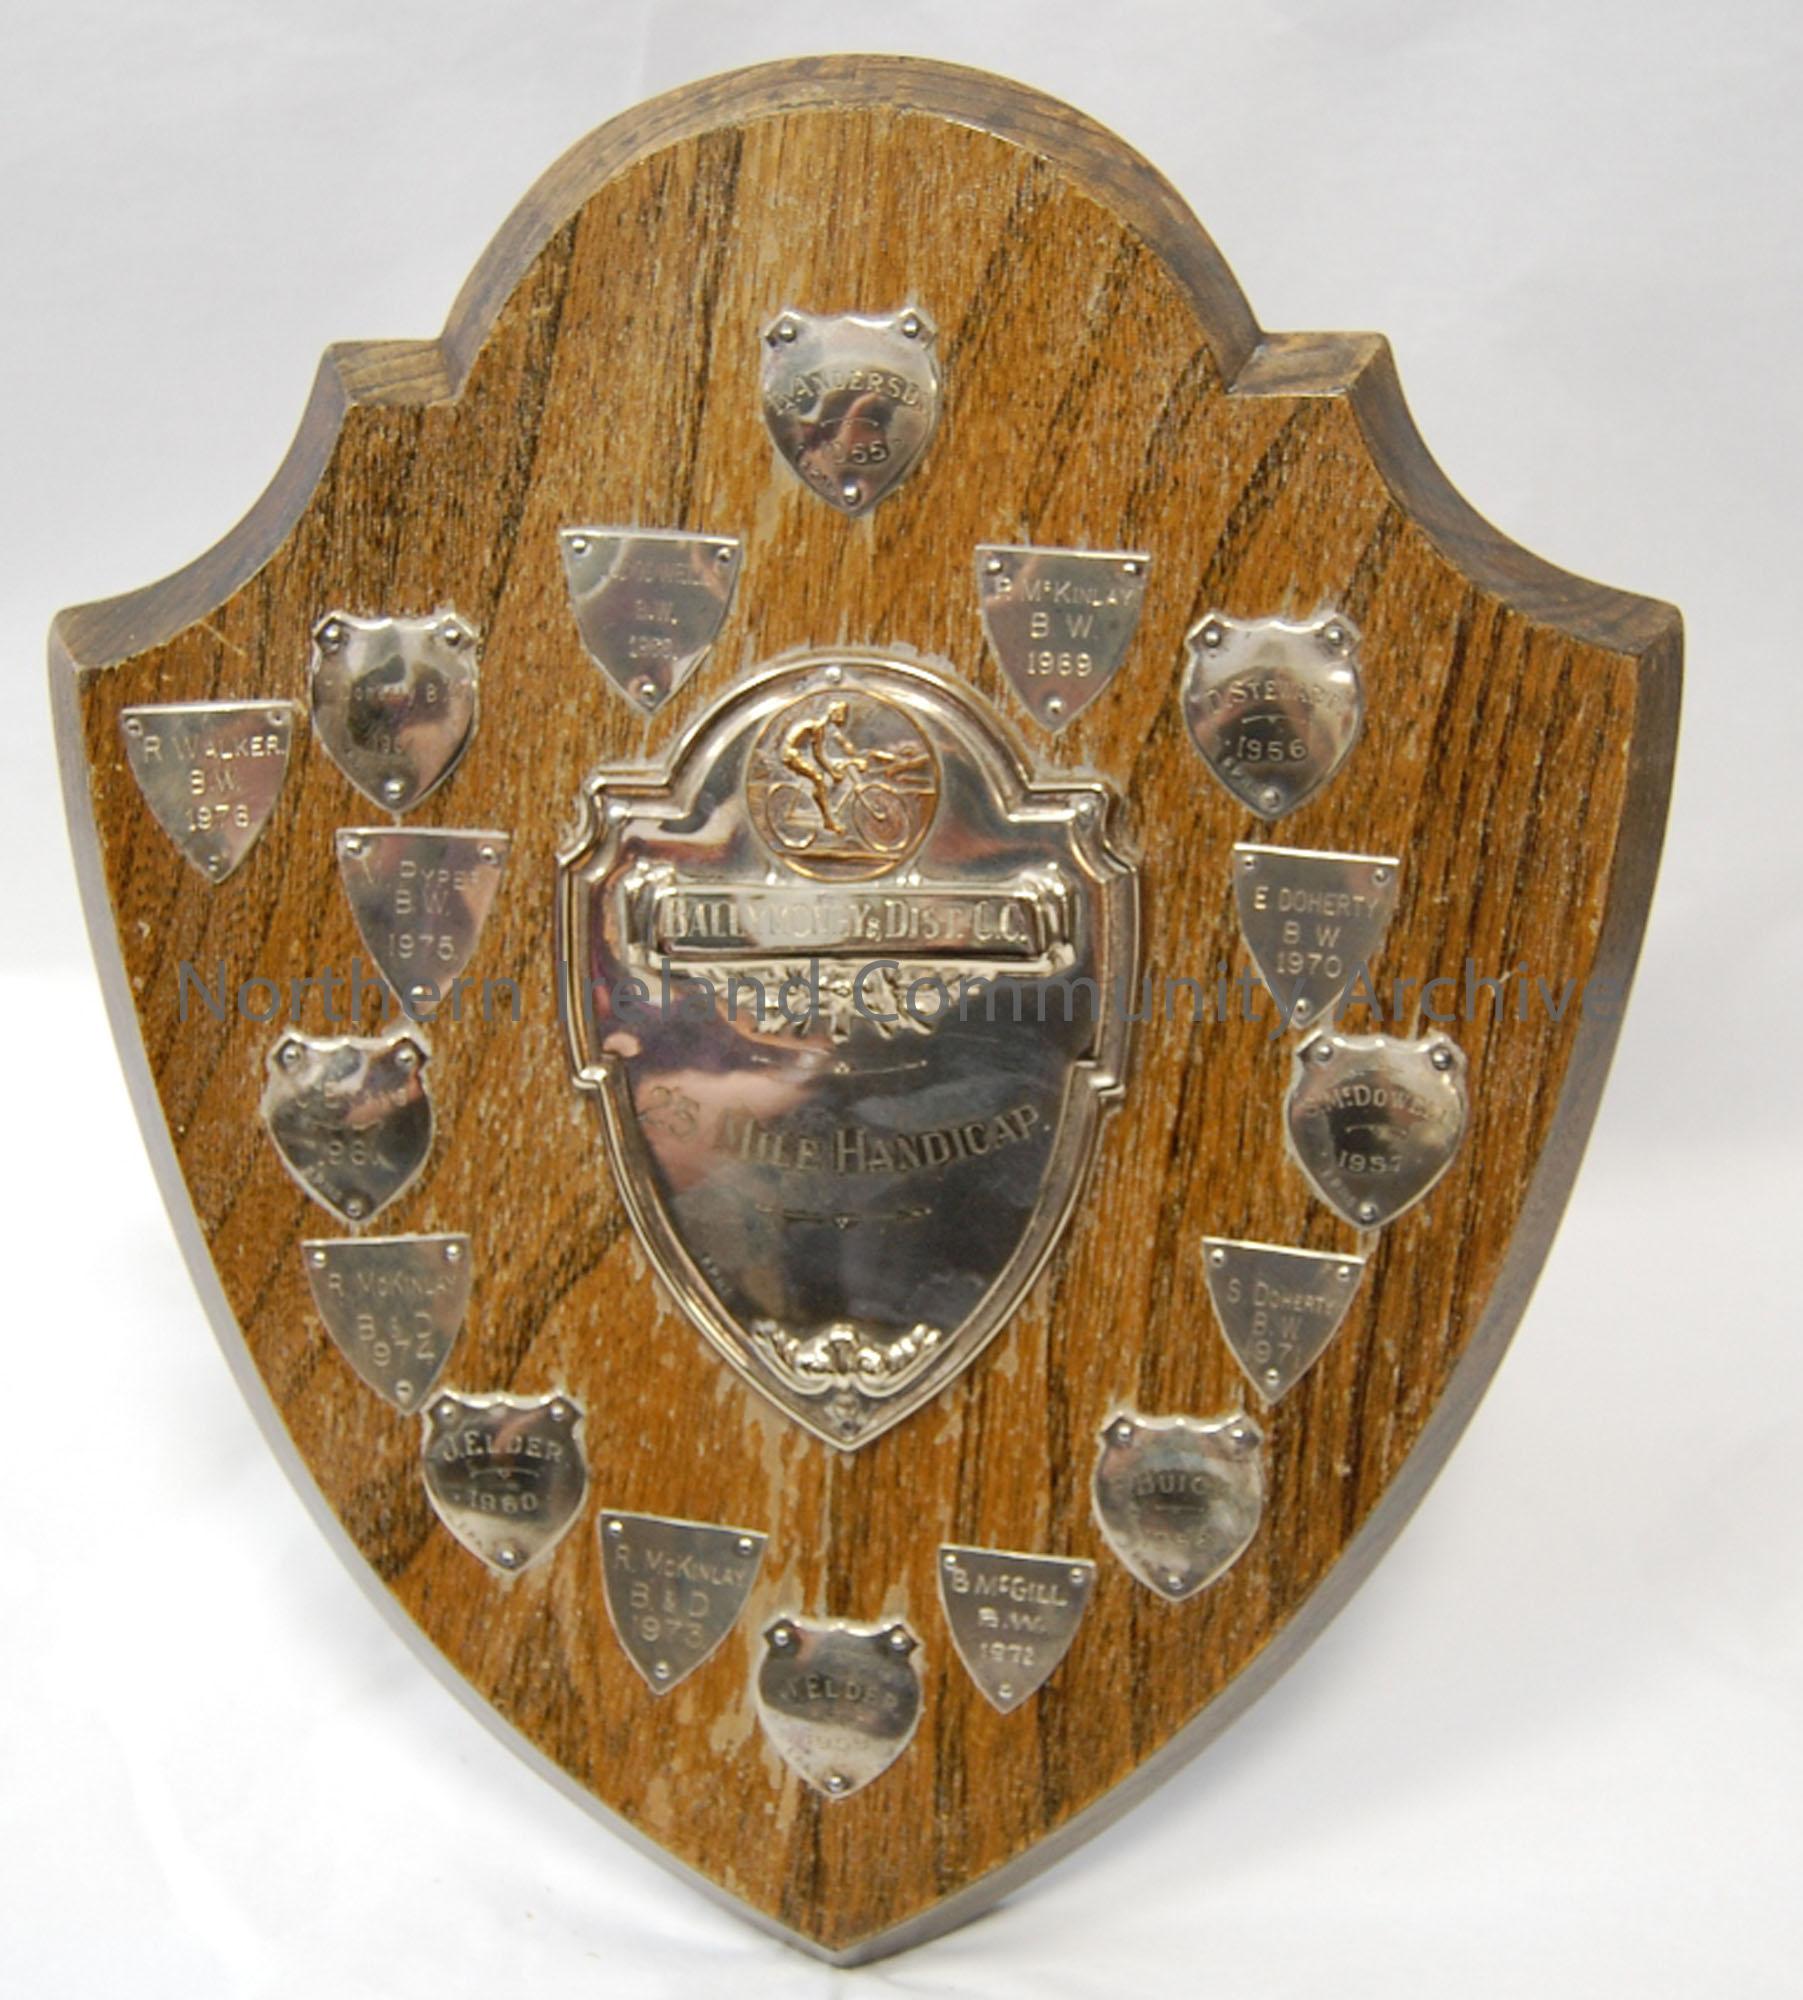 Wooden shield with smaller metal plaques naming winners of shield 1955-1976. Central shield engraved ’25 mile Handicap’. Stand attached to the back ma…